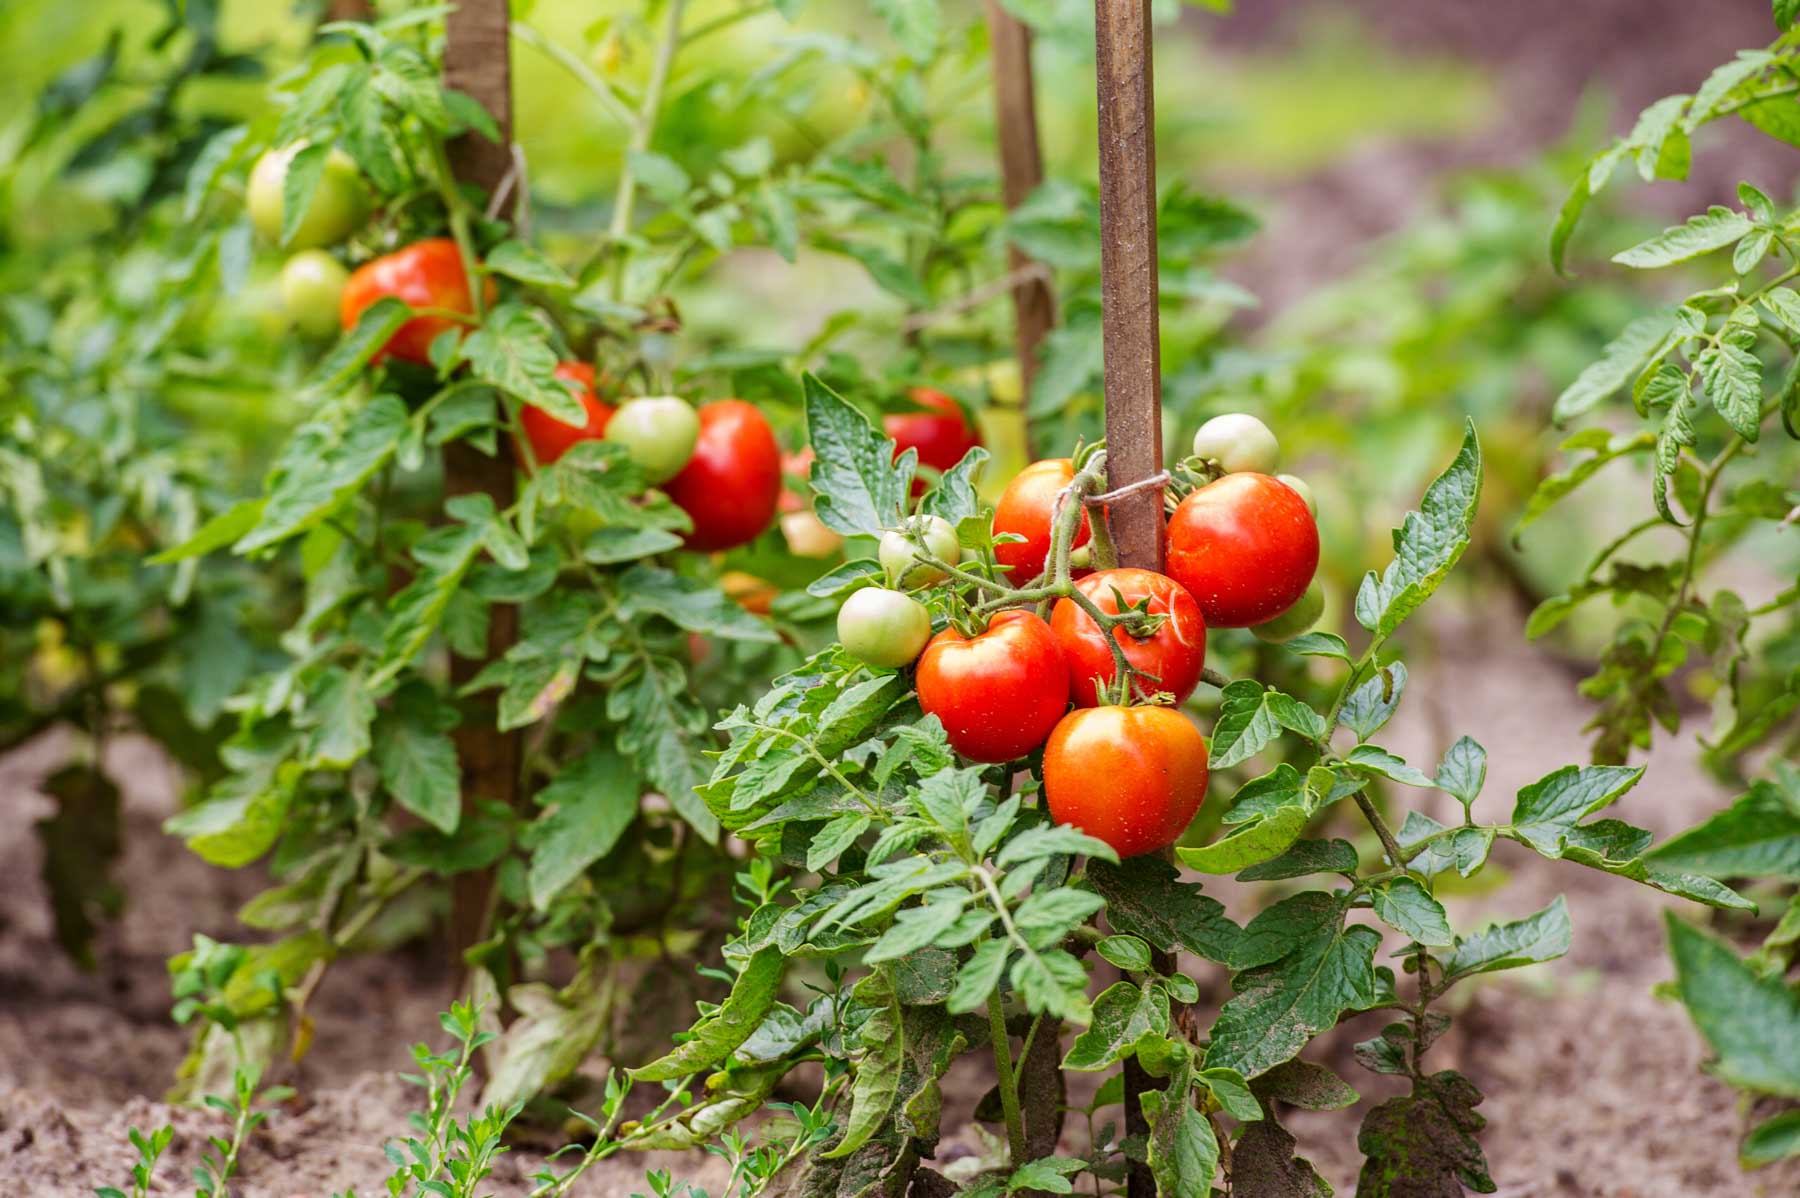 Get the Basics Right: Tomato by Dr. Mario A. Villarino, County Extension Agent for Agriculture and Natural Resources